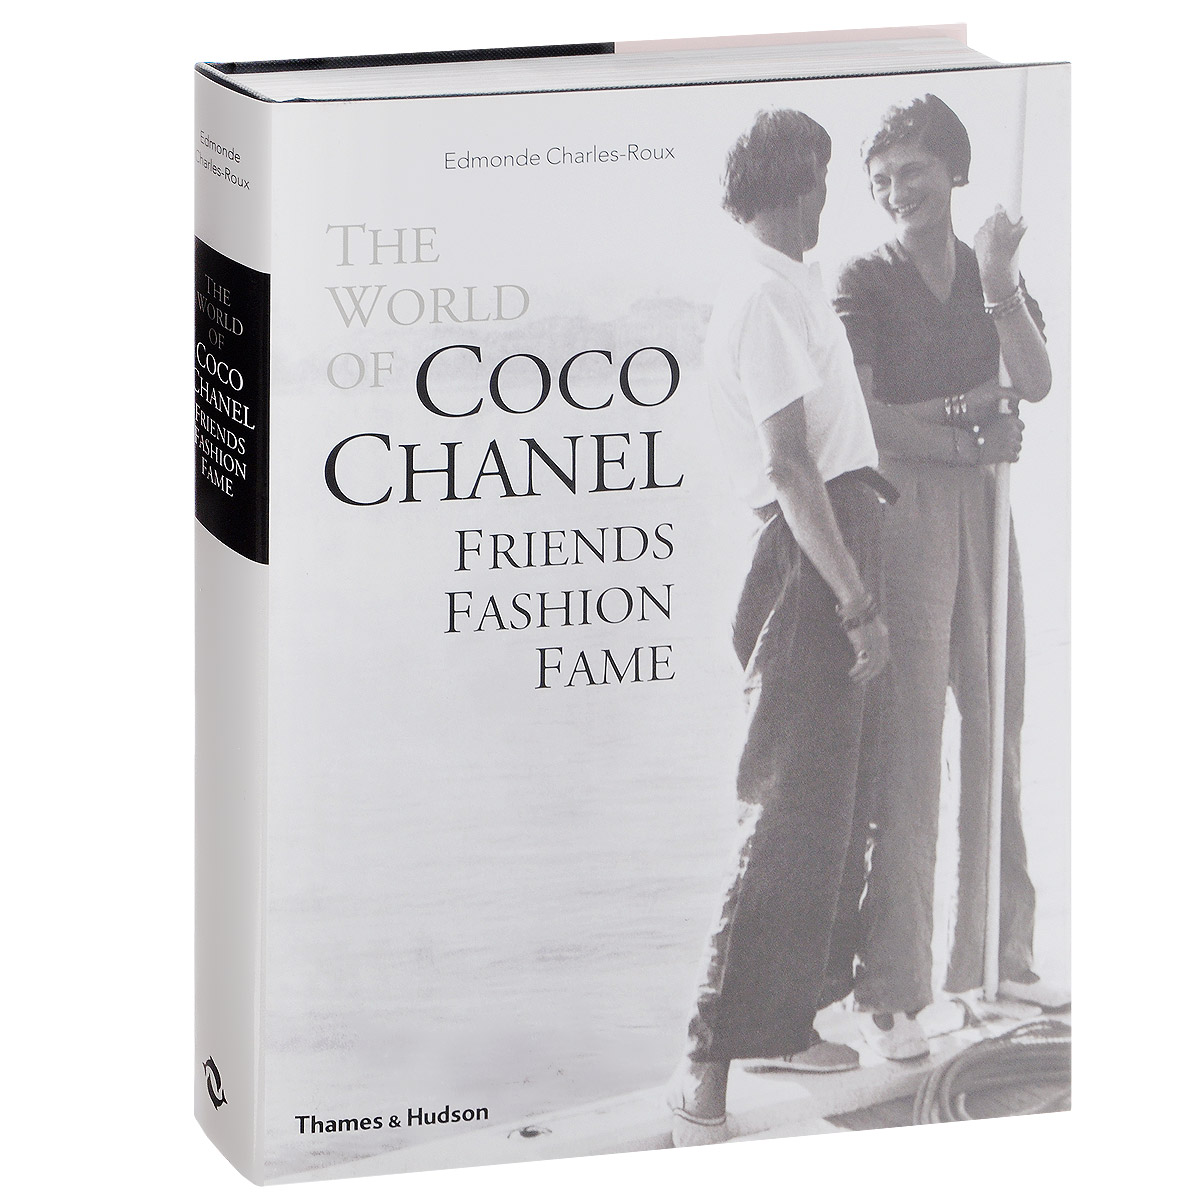 The World of Coco Chanel: Friends, Fashion, Fame